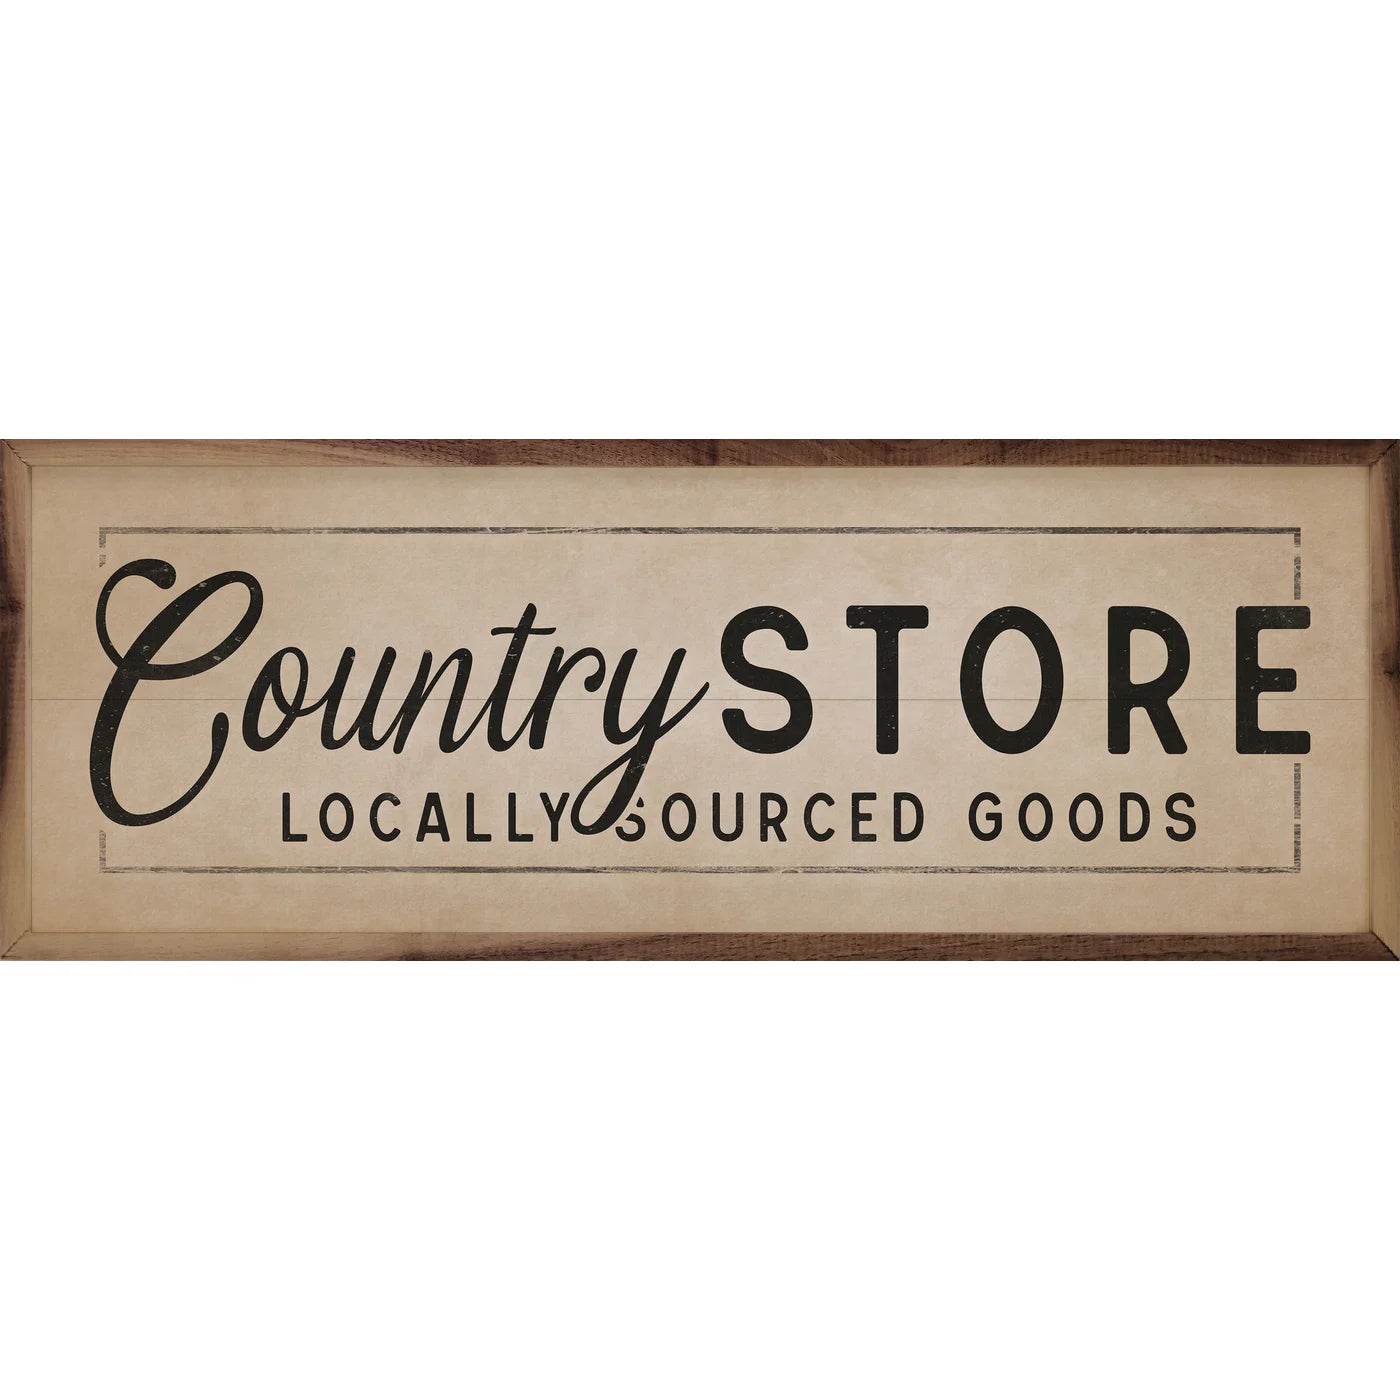 Country Store Locally Sourced Goods Border Wood Framed Print